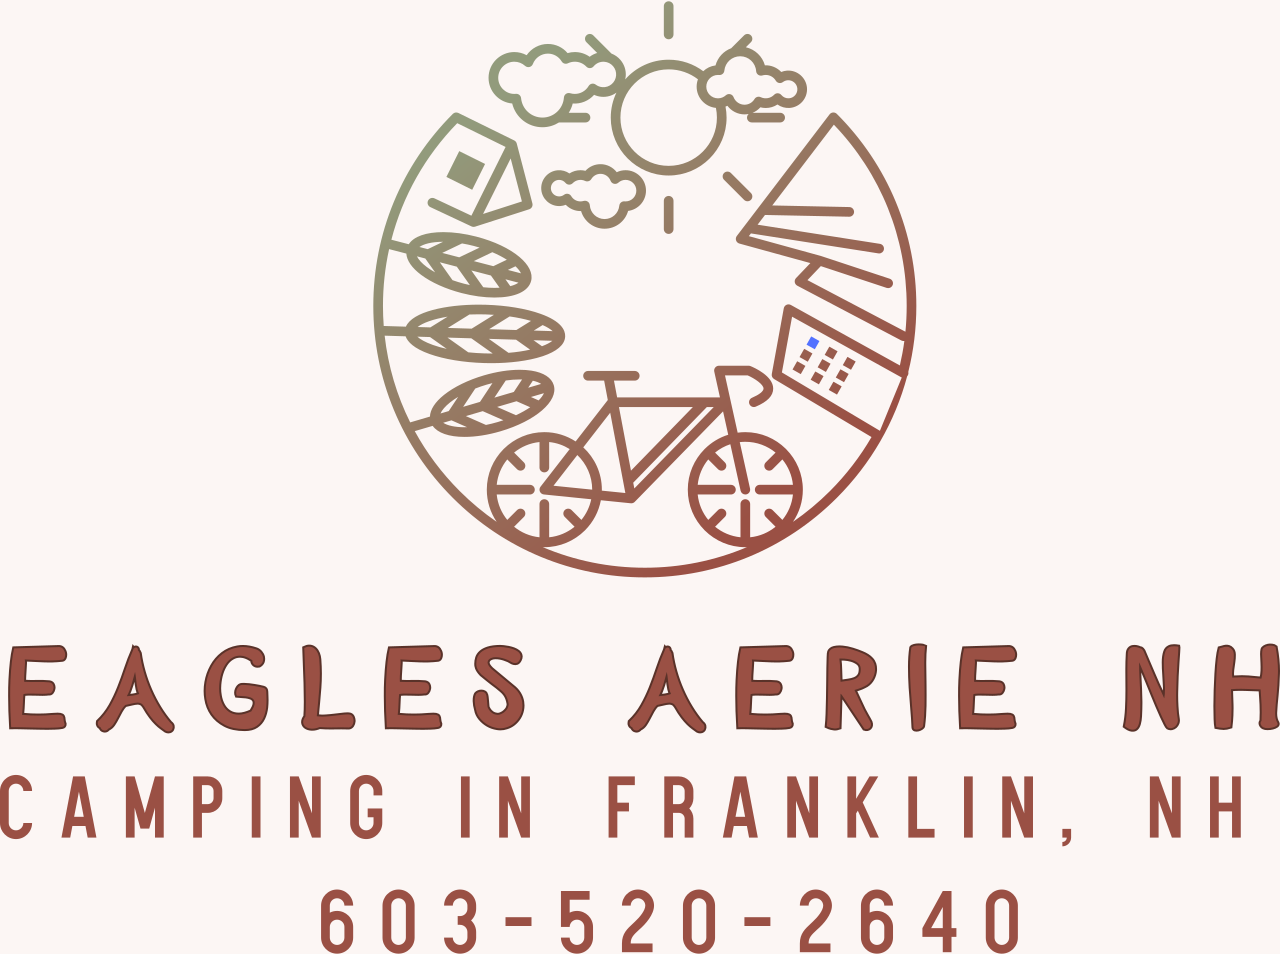 Eagles Aerie NH's web page